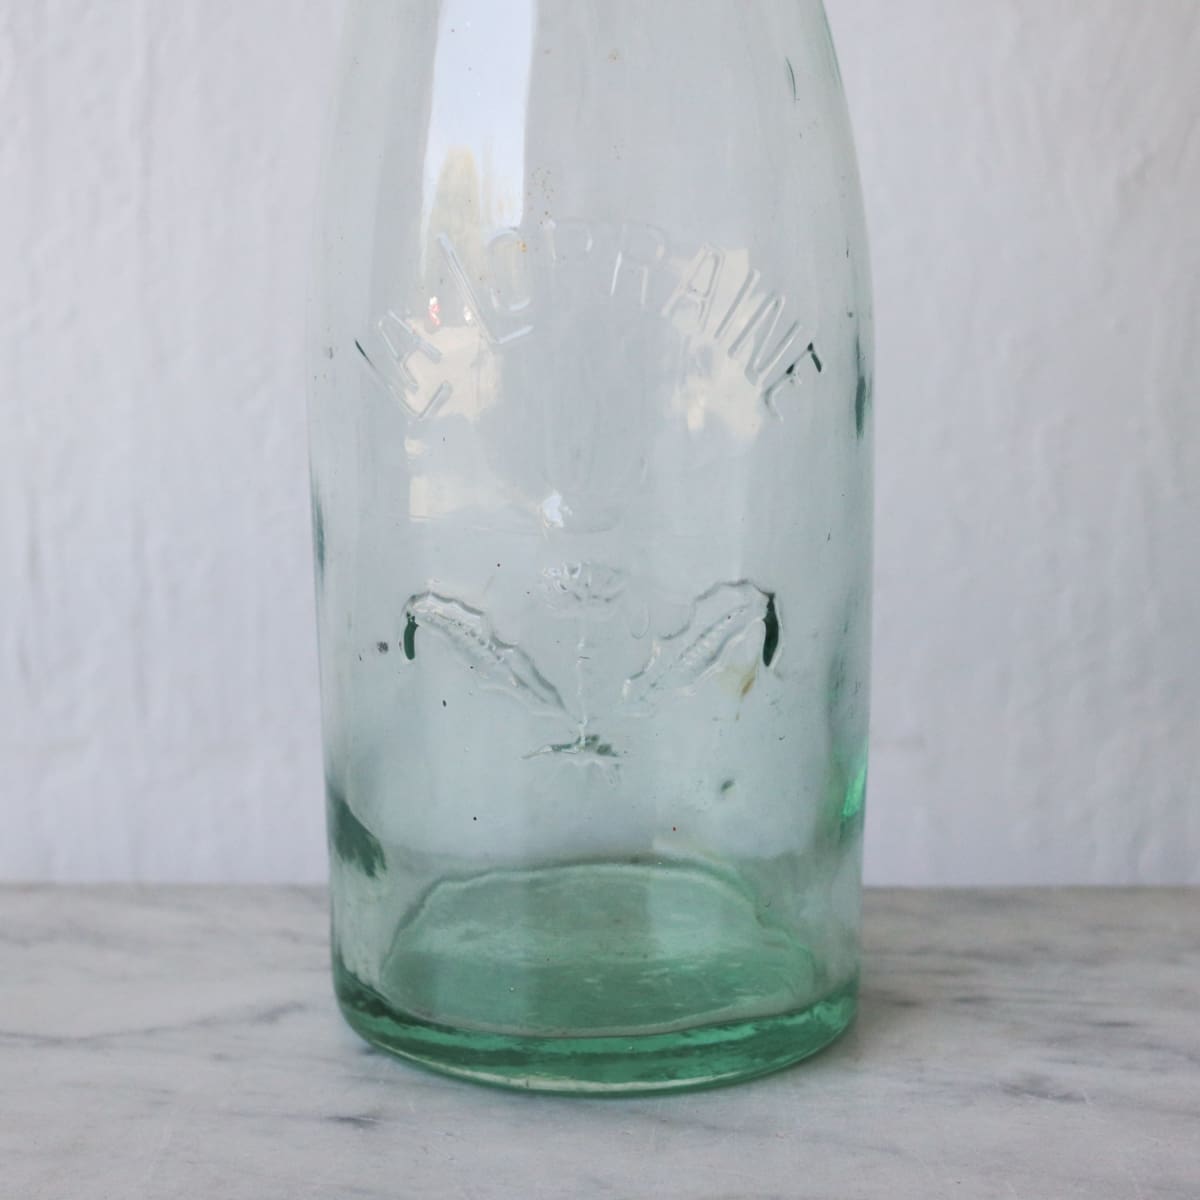 Tall La Lorraine Canning Jar - the french kitchen